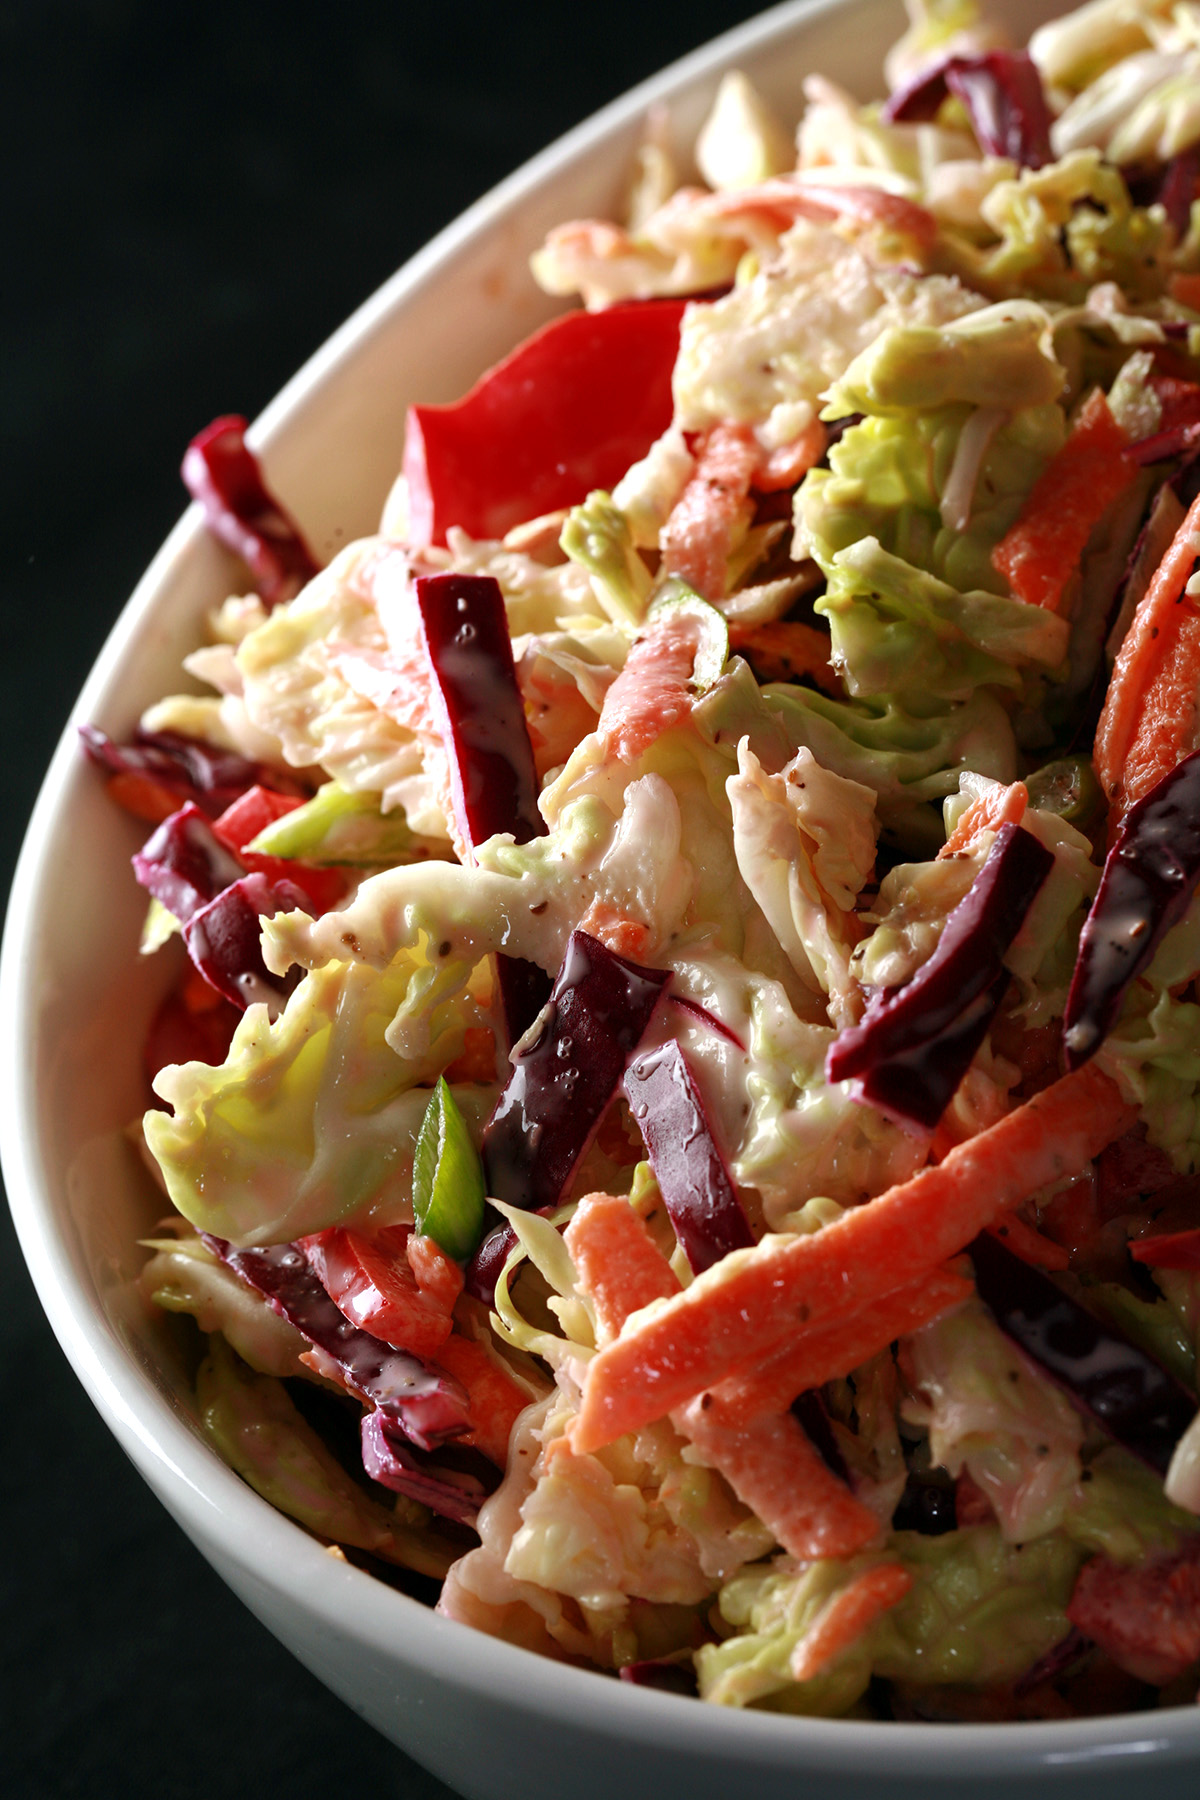 A bowl of colorful low carb coleslaw.